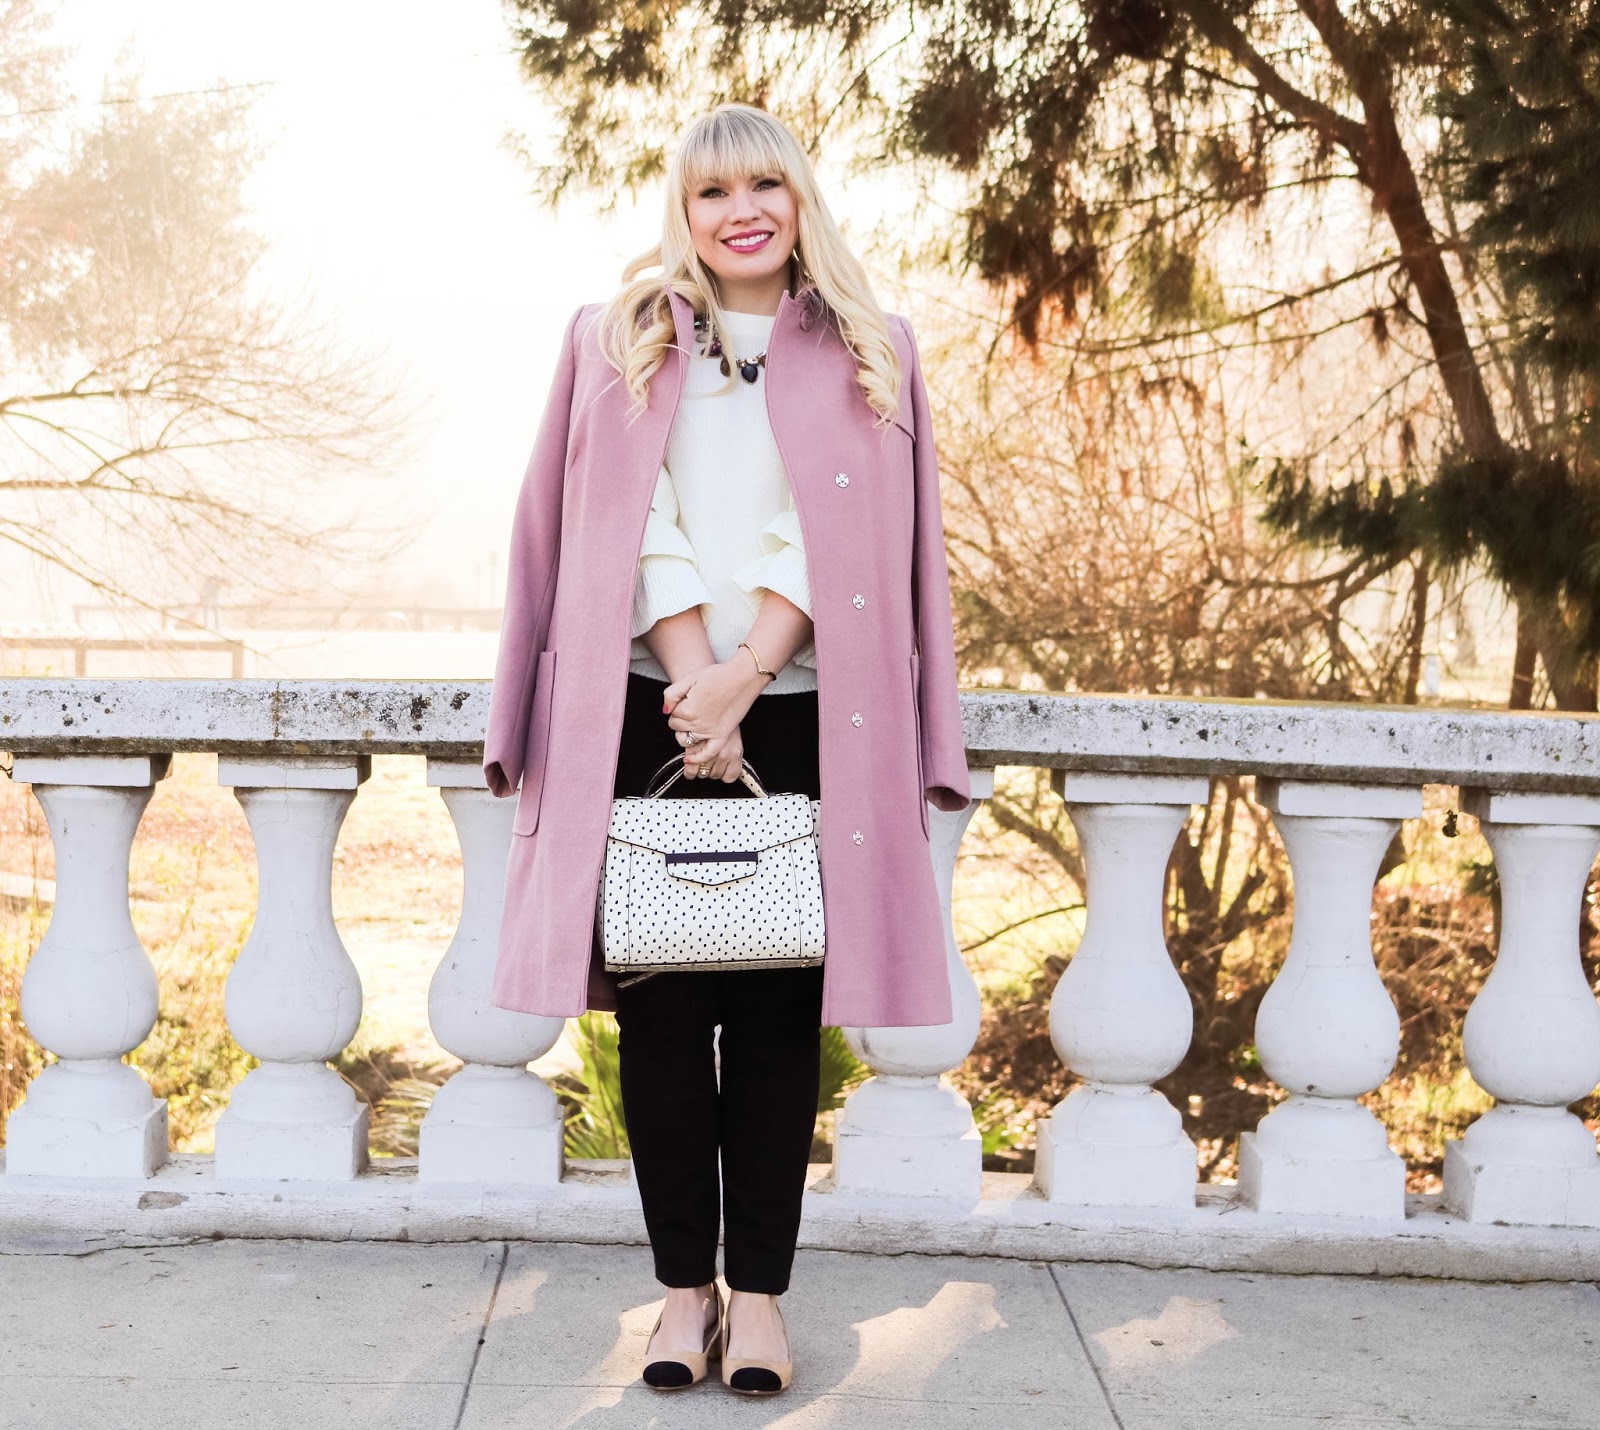 Feminine fashion blogger Lizzie in Lace shares 11 Valentine's Day Outfit Ideas